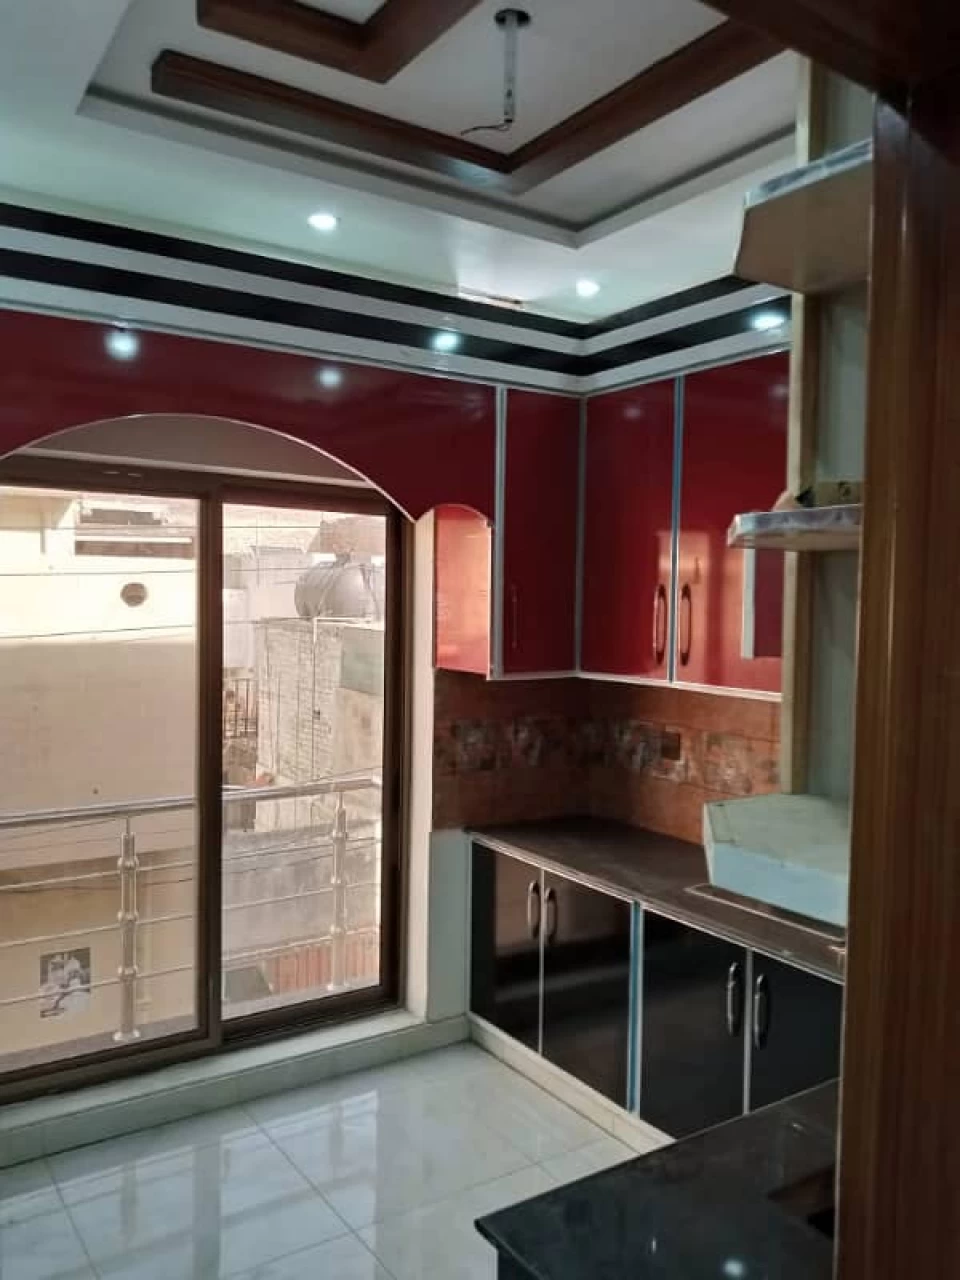 House For Sale in Lahore , House For Sale in Cantt , House For Sale in Cantt Lahore , House For Sale in Cantt , 5 Marla House for Sale In Ghazi road Cantt , Cantt, Lahore Pakistan,5 Bedrooms Bedrooms, 5 Rooms Rooms, 5 BathroomsBathrooms, House,For Sale,2632